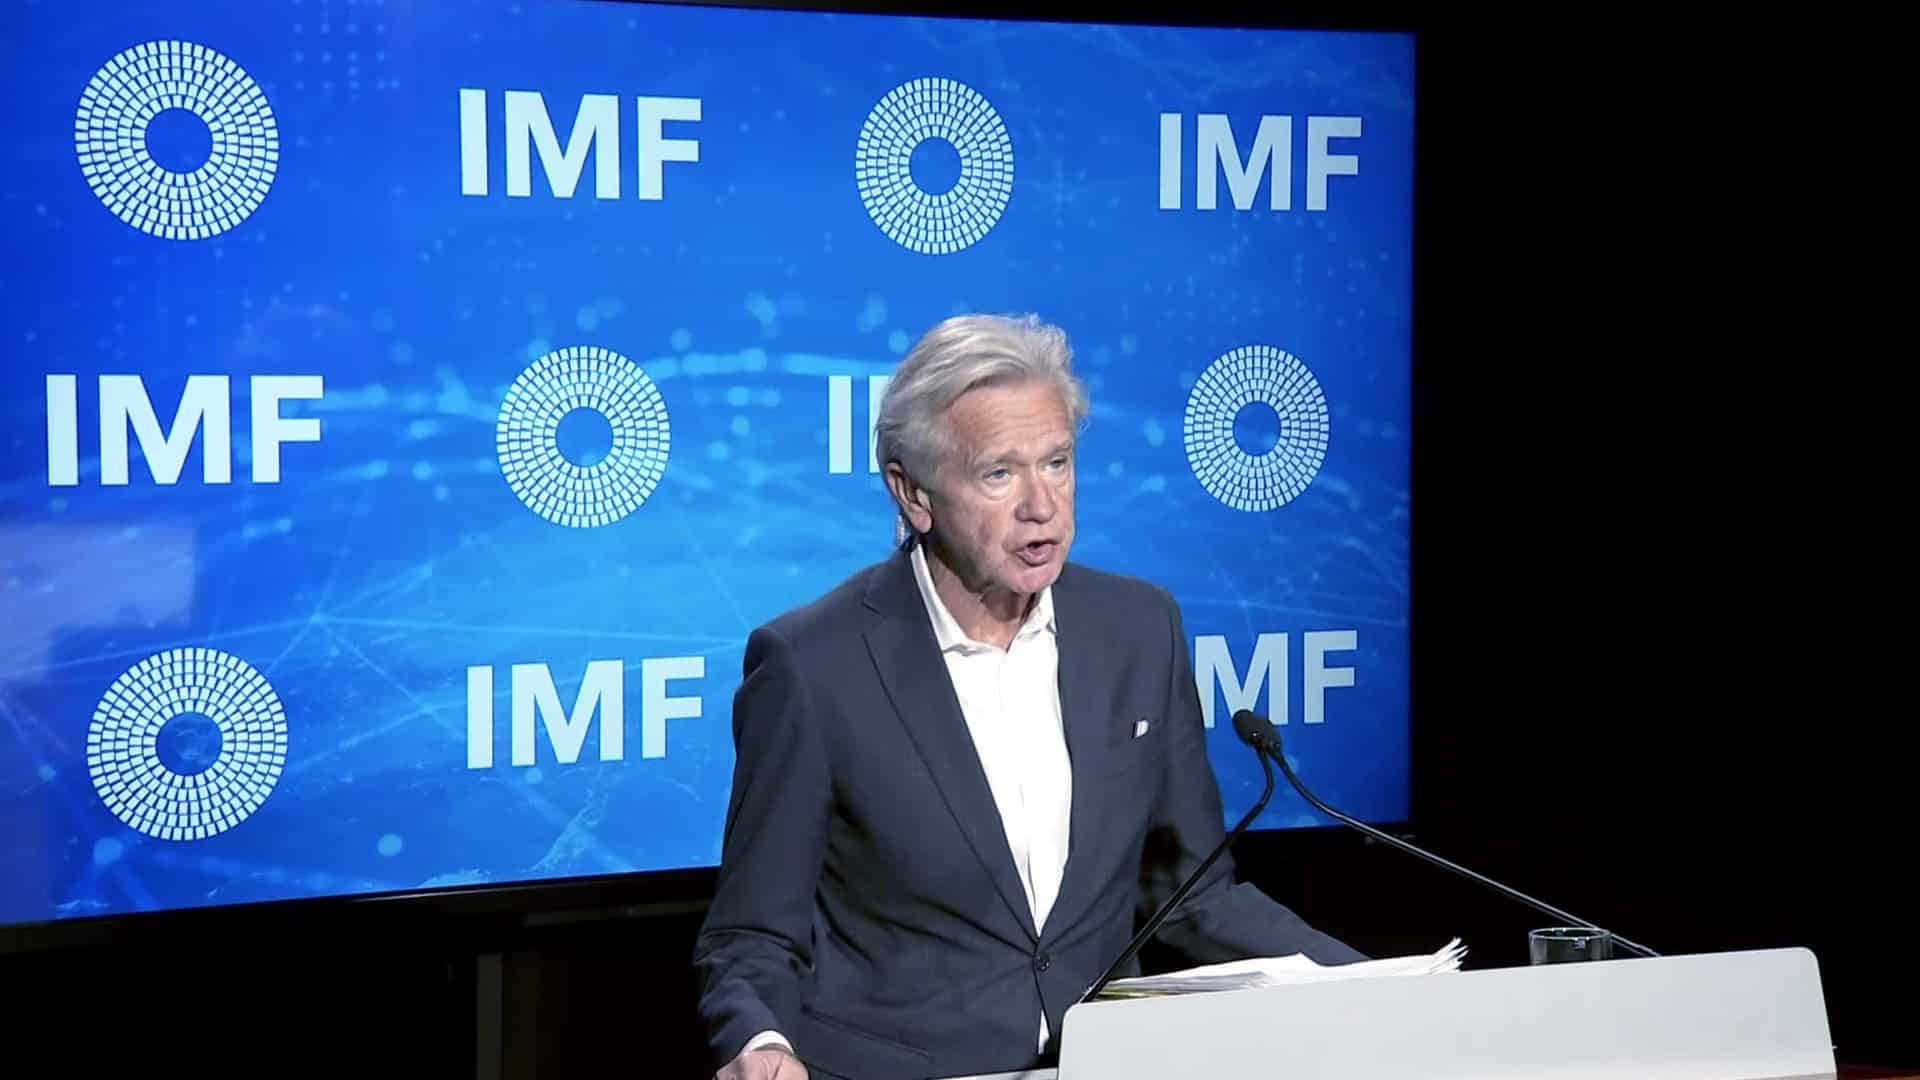 IMF welcomes India's announcement at COP26 on renewables, net zero target by 2070